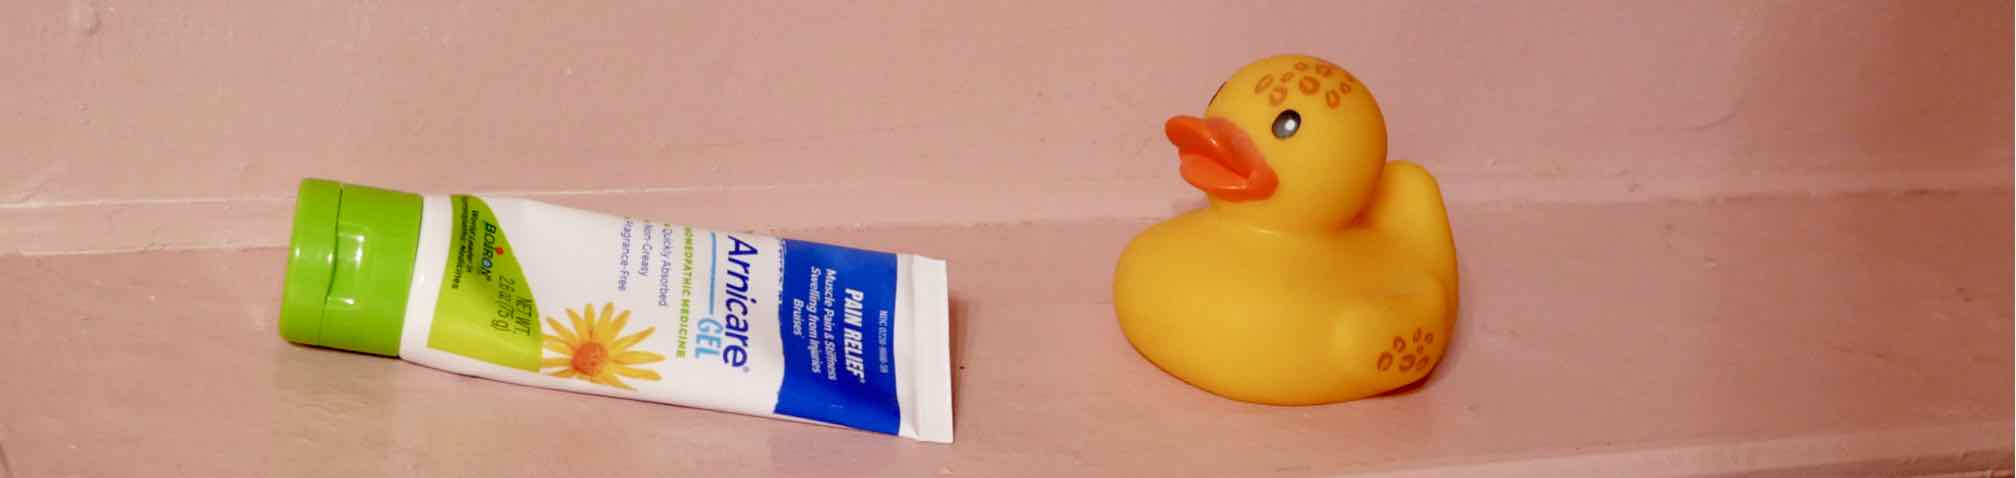 tube of Arnicare Gel and a rubber ducky